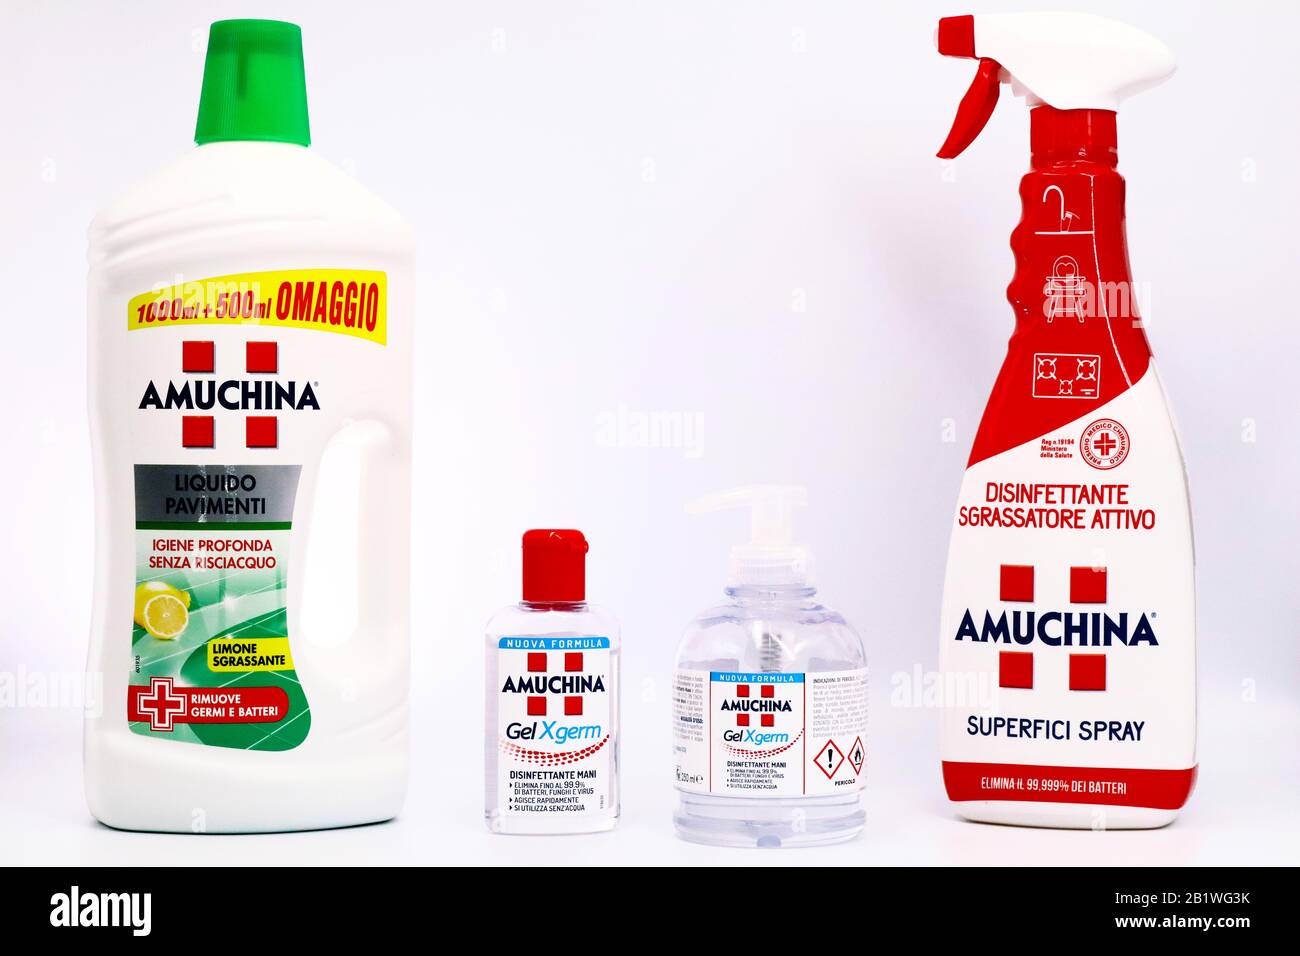 AMUCHINA Gel XGERM Hand Sanitizer and household cleaning detergents.  AMUCHINA is an Italian brand of ACRAF ANGELINI Pharma Stock Photo - Alamy